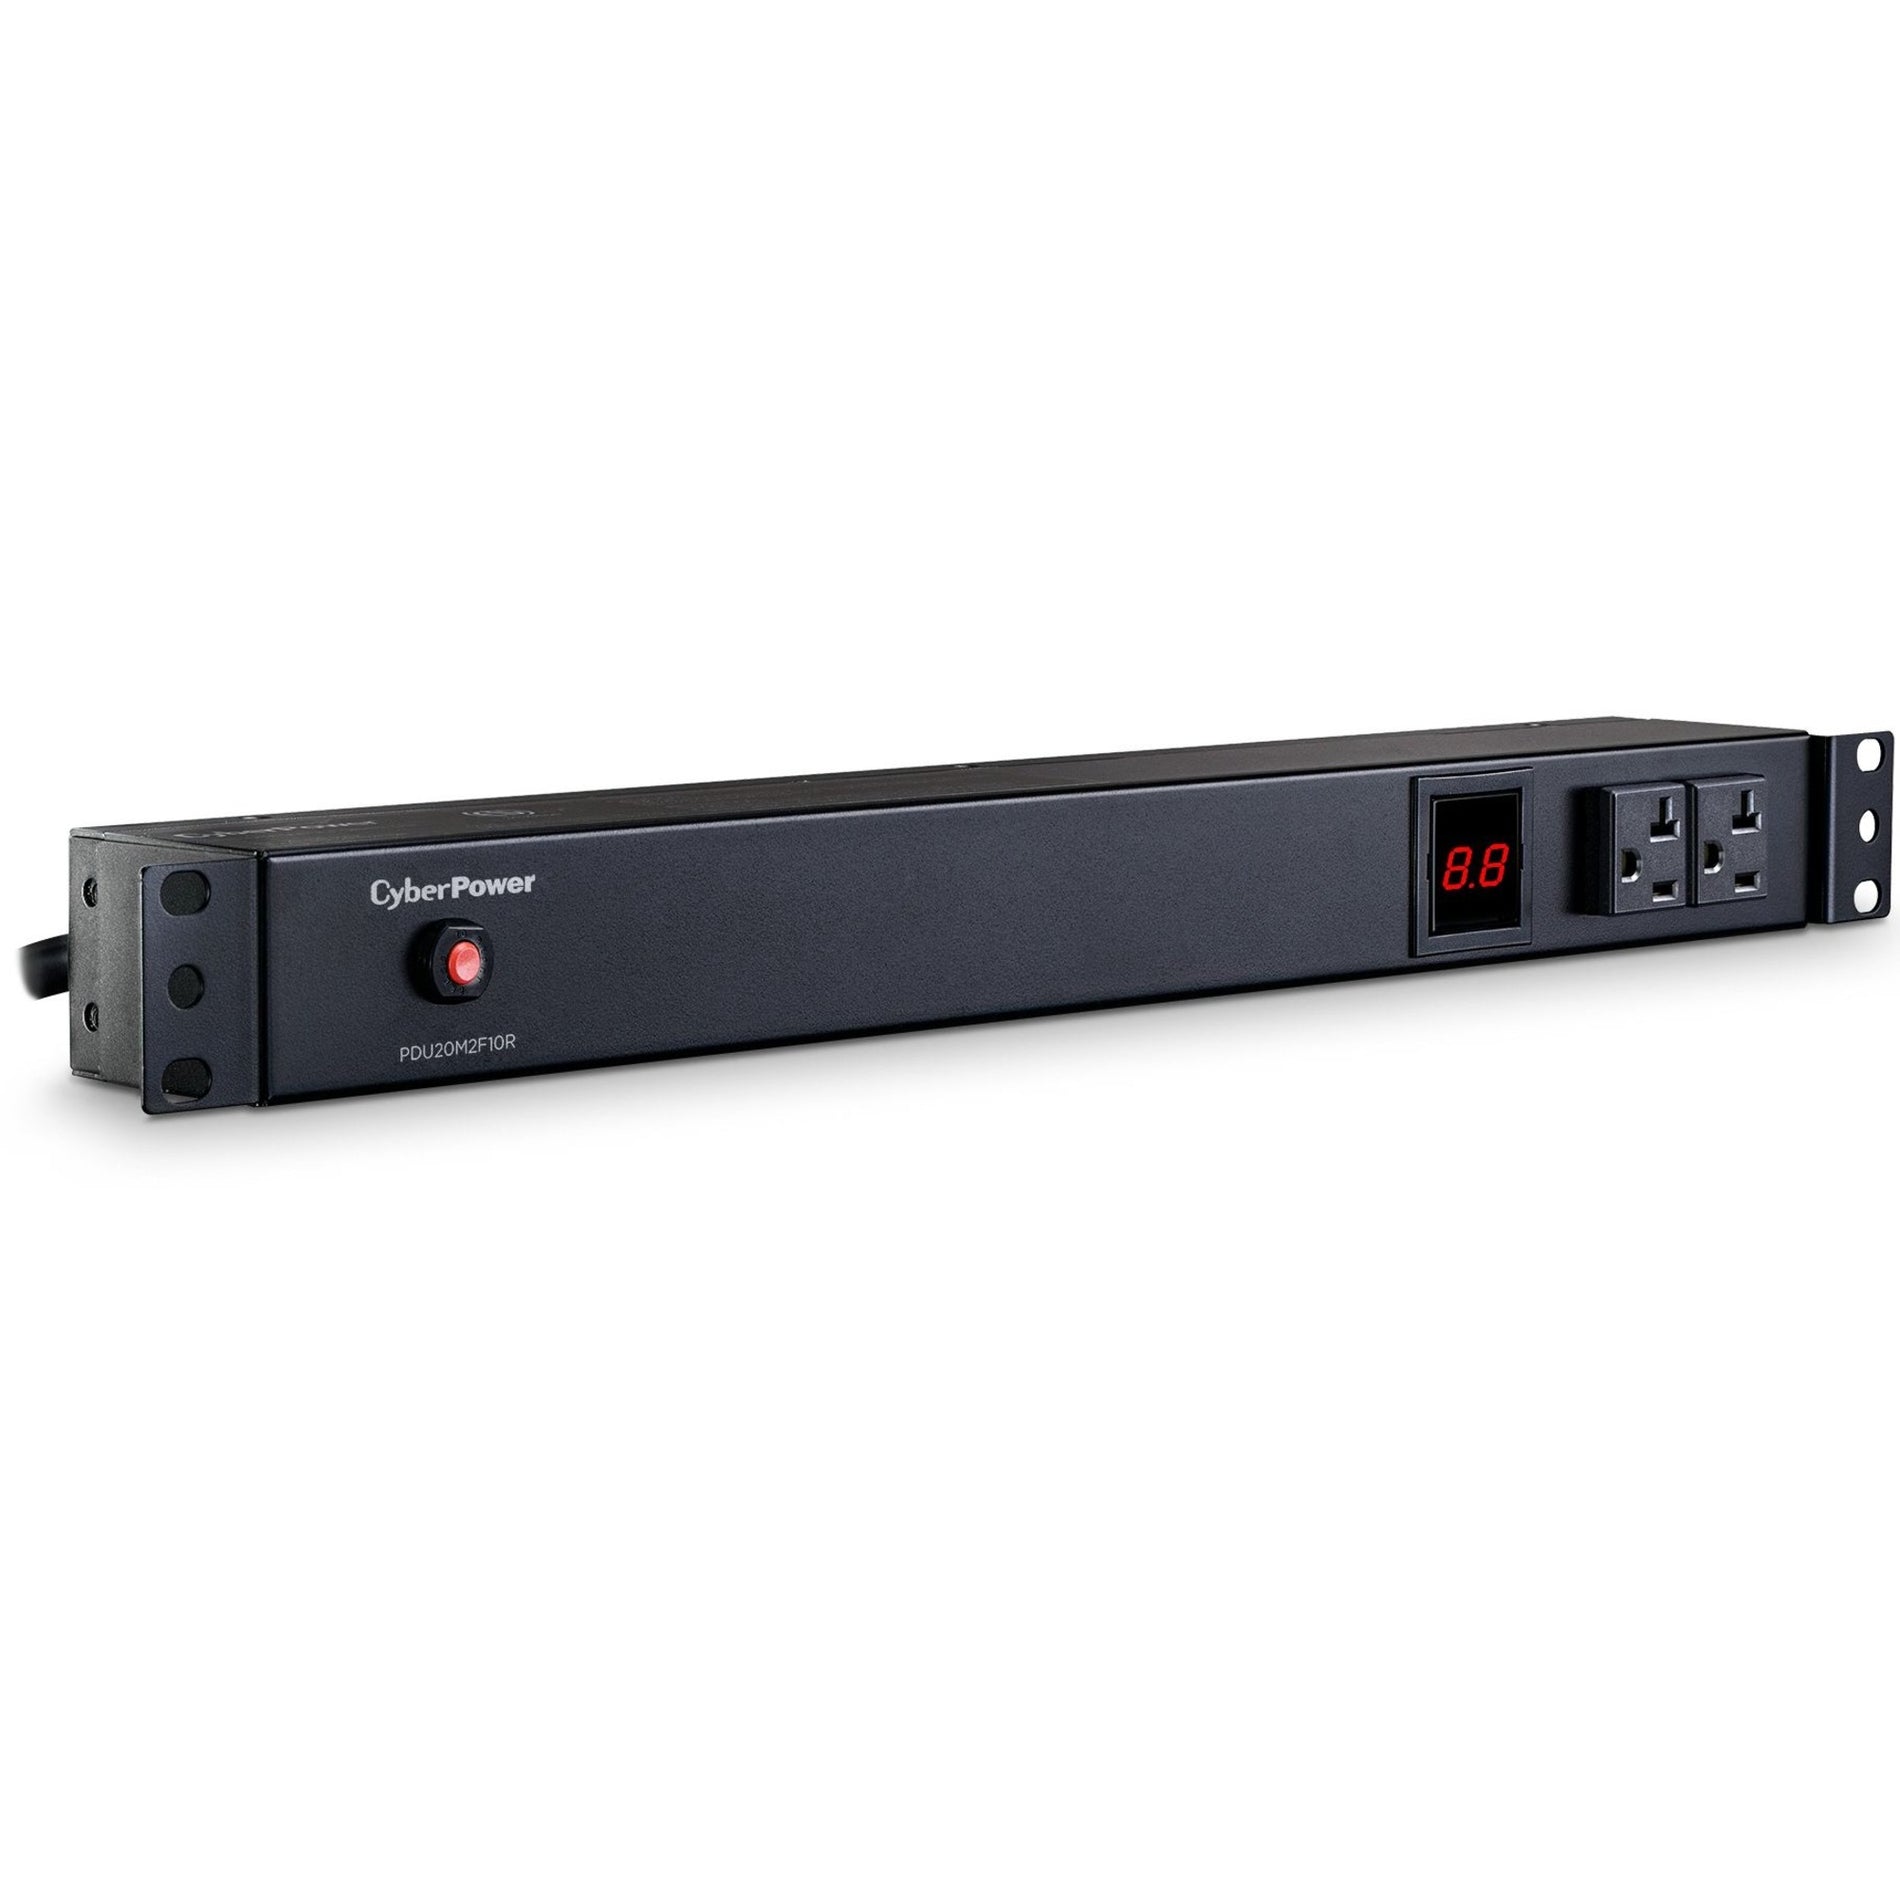 CyberPower PDU20M2F10R Metered PDU, Single Phase 100-125VAC 20A, 12-Outlets